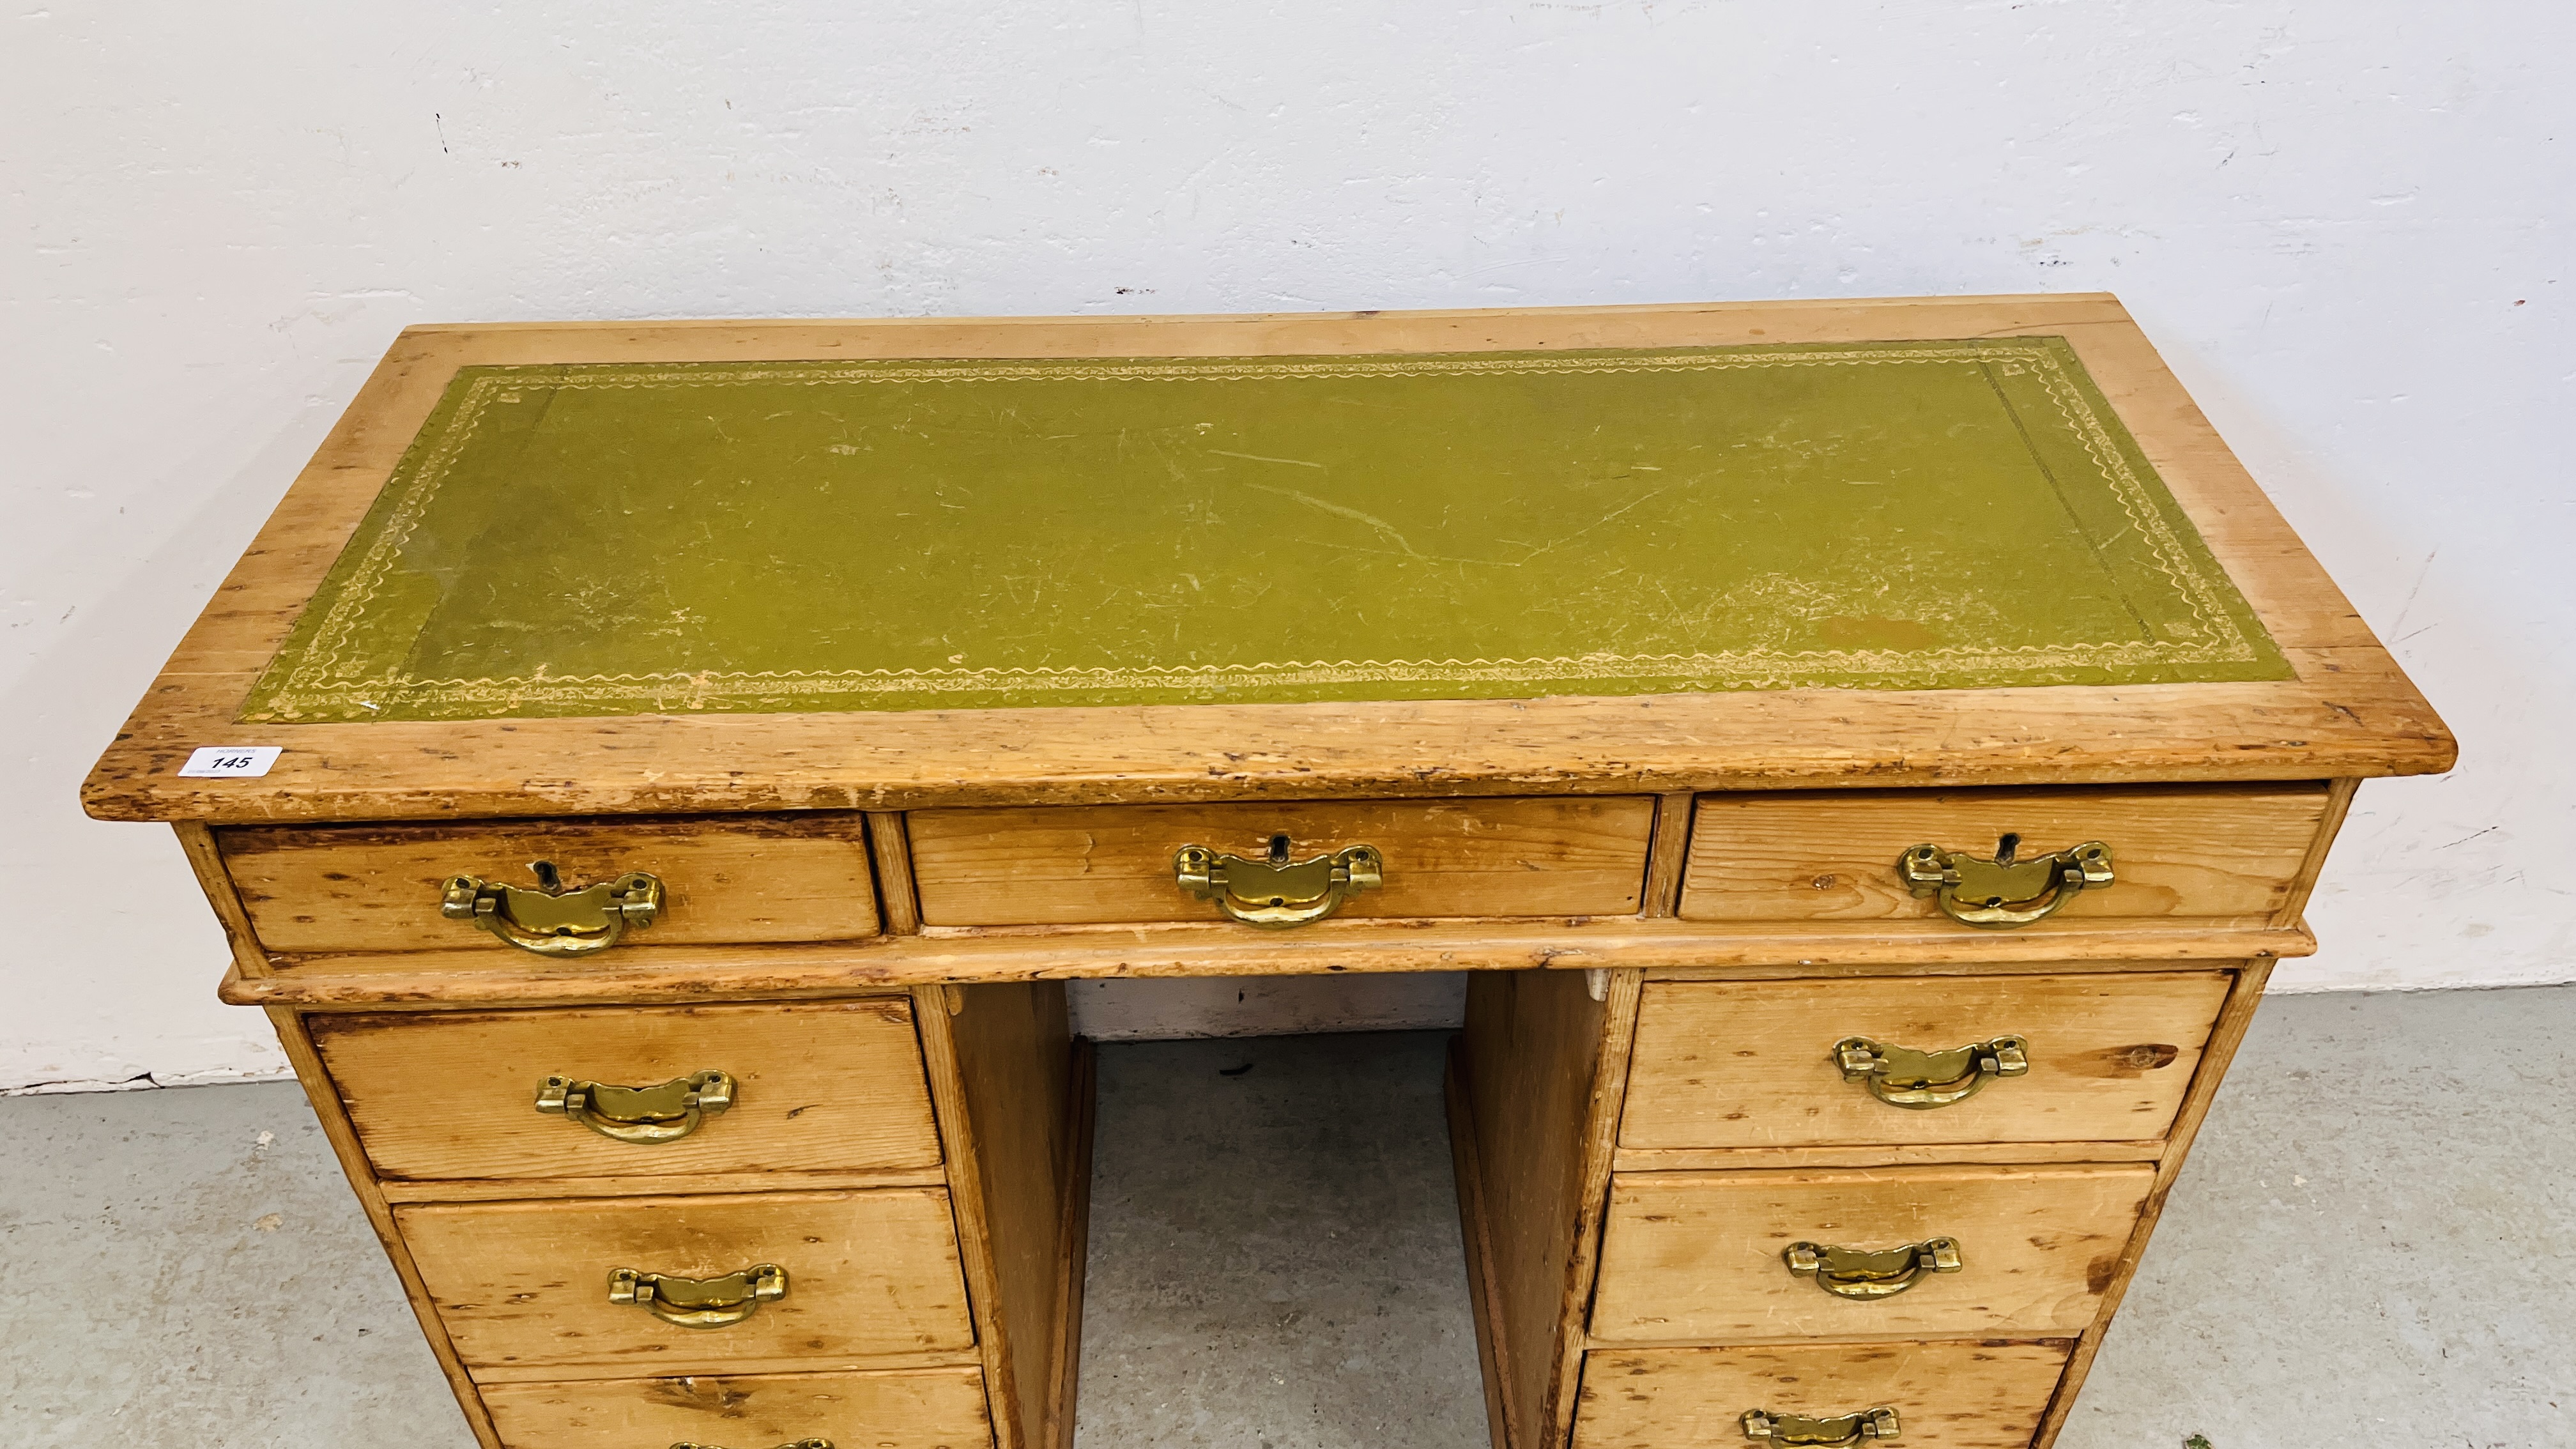 AN ANTIQUE WAXED PINE NINE DRAWER KNEEHOLE DESK WITH TOOLED LEATHER INSET TOP. - Image 2 of 11